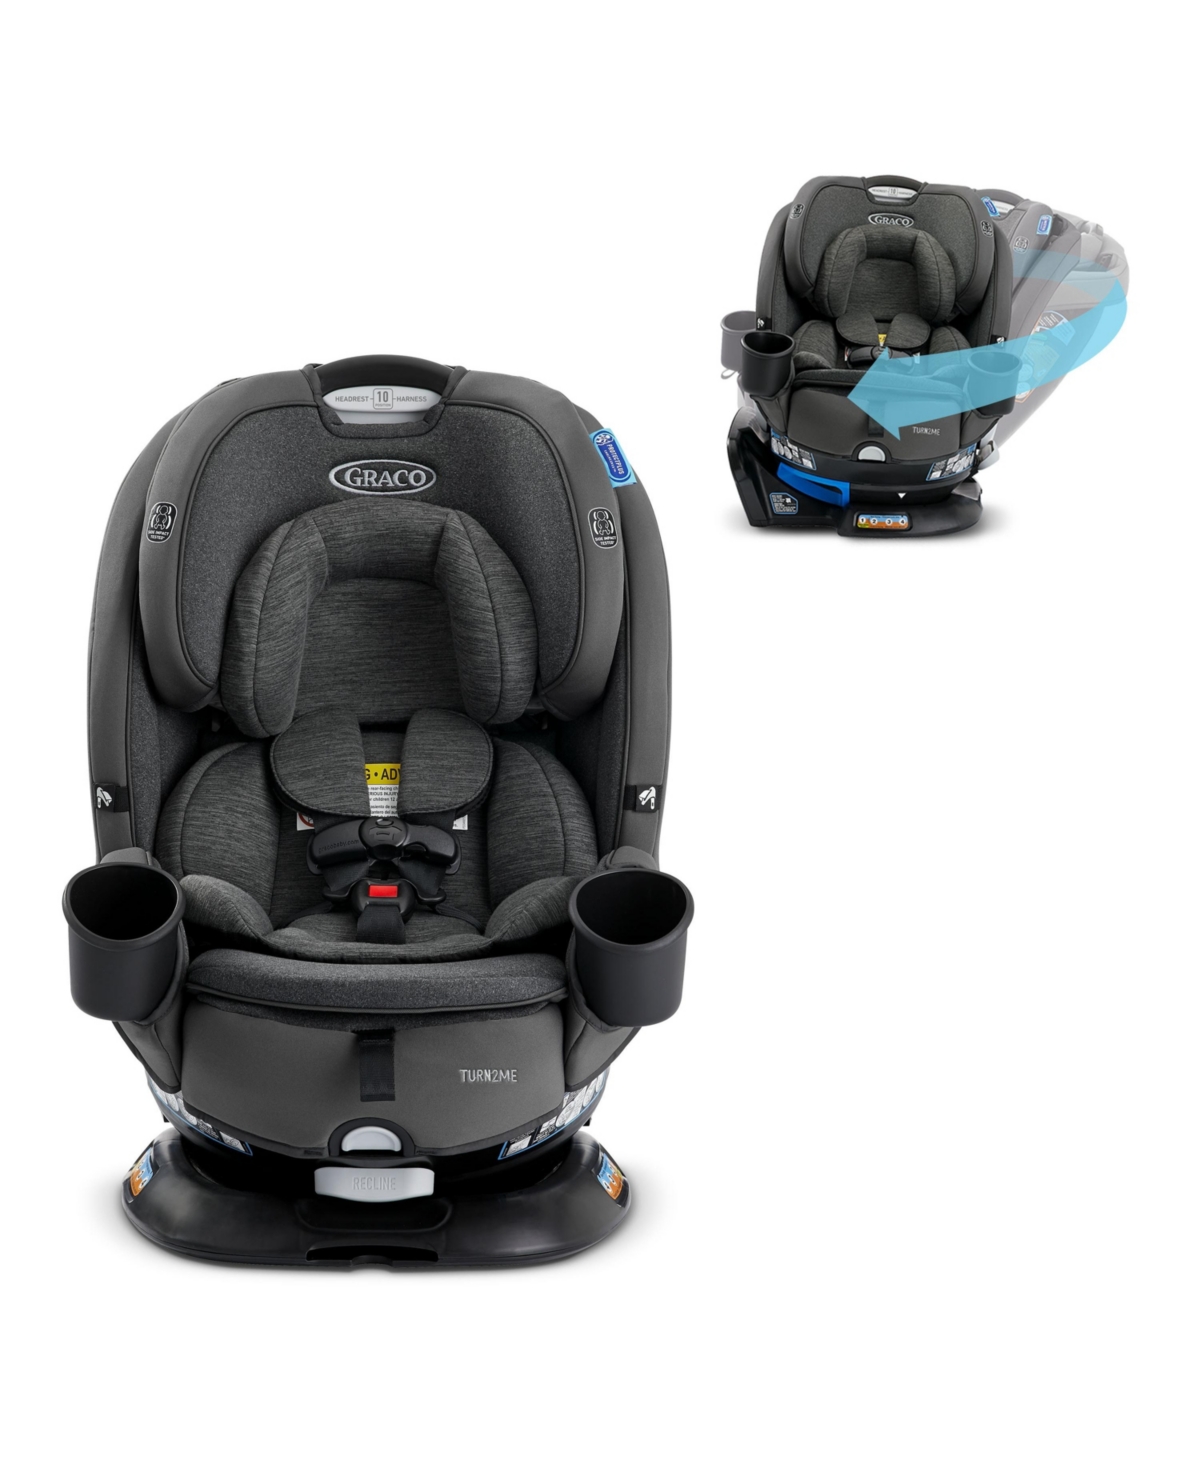 Graco Turn2me 3-in-1 Car Seat In Manchester